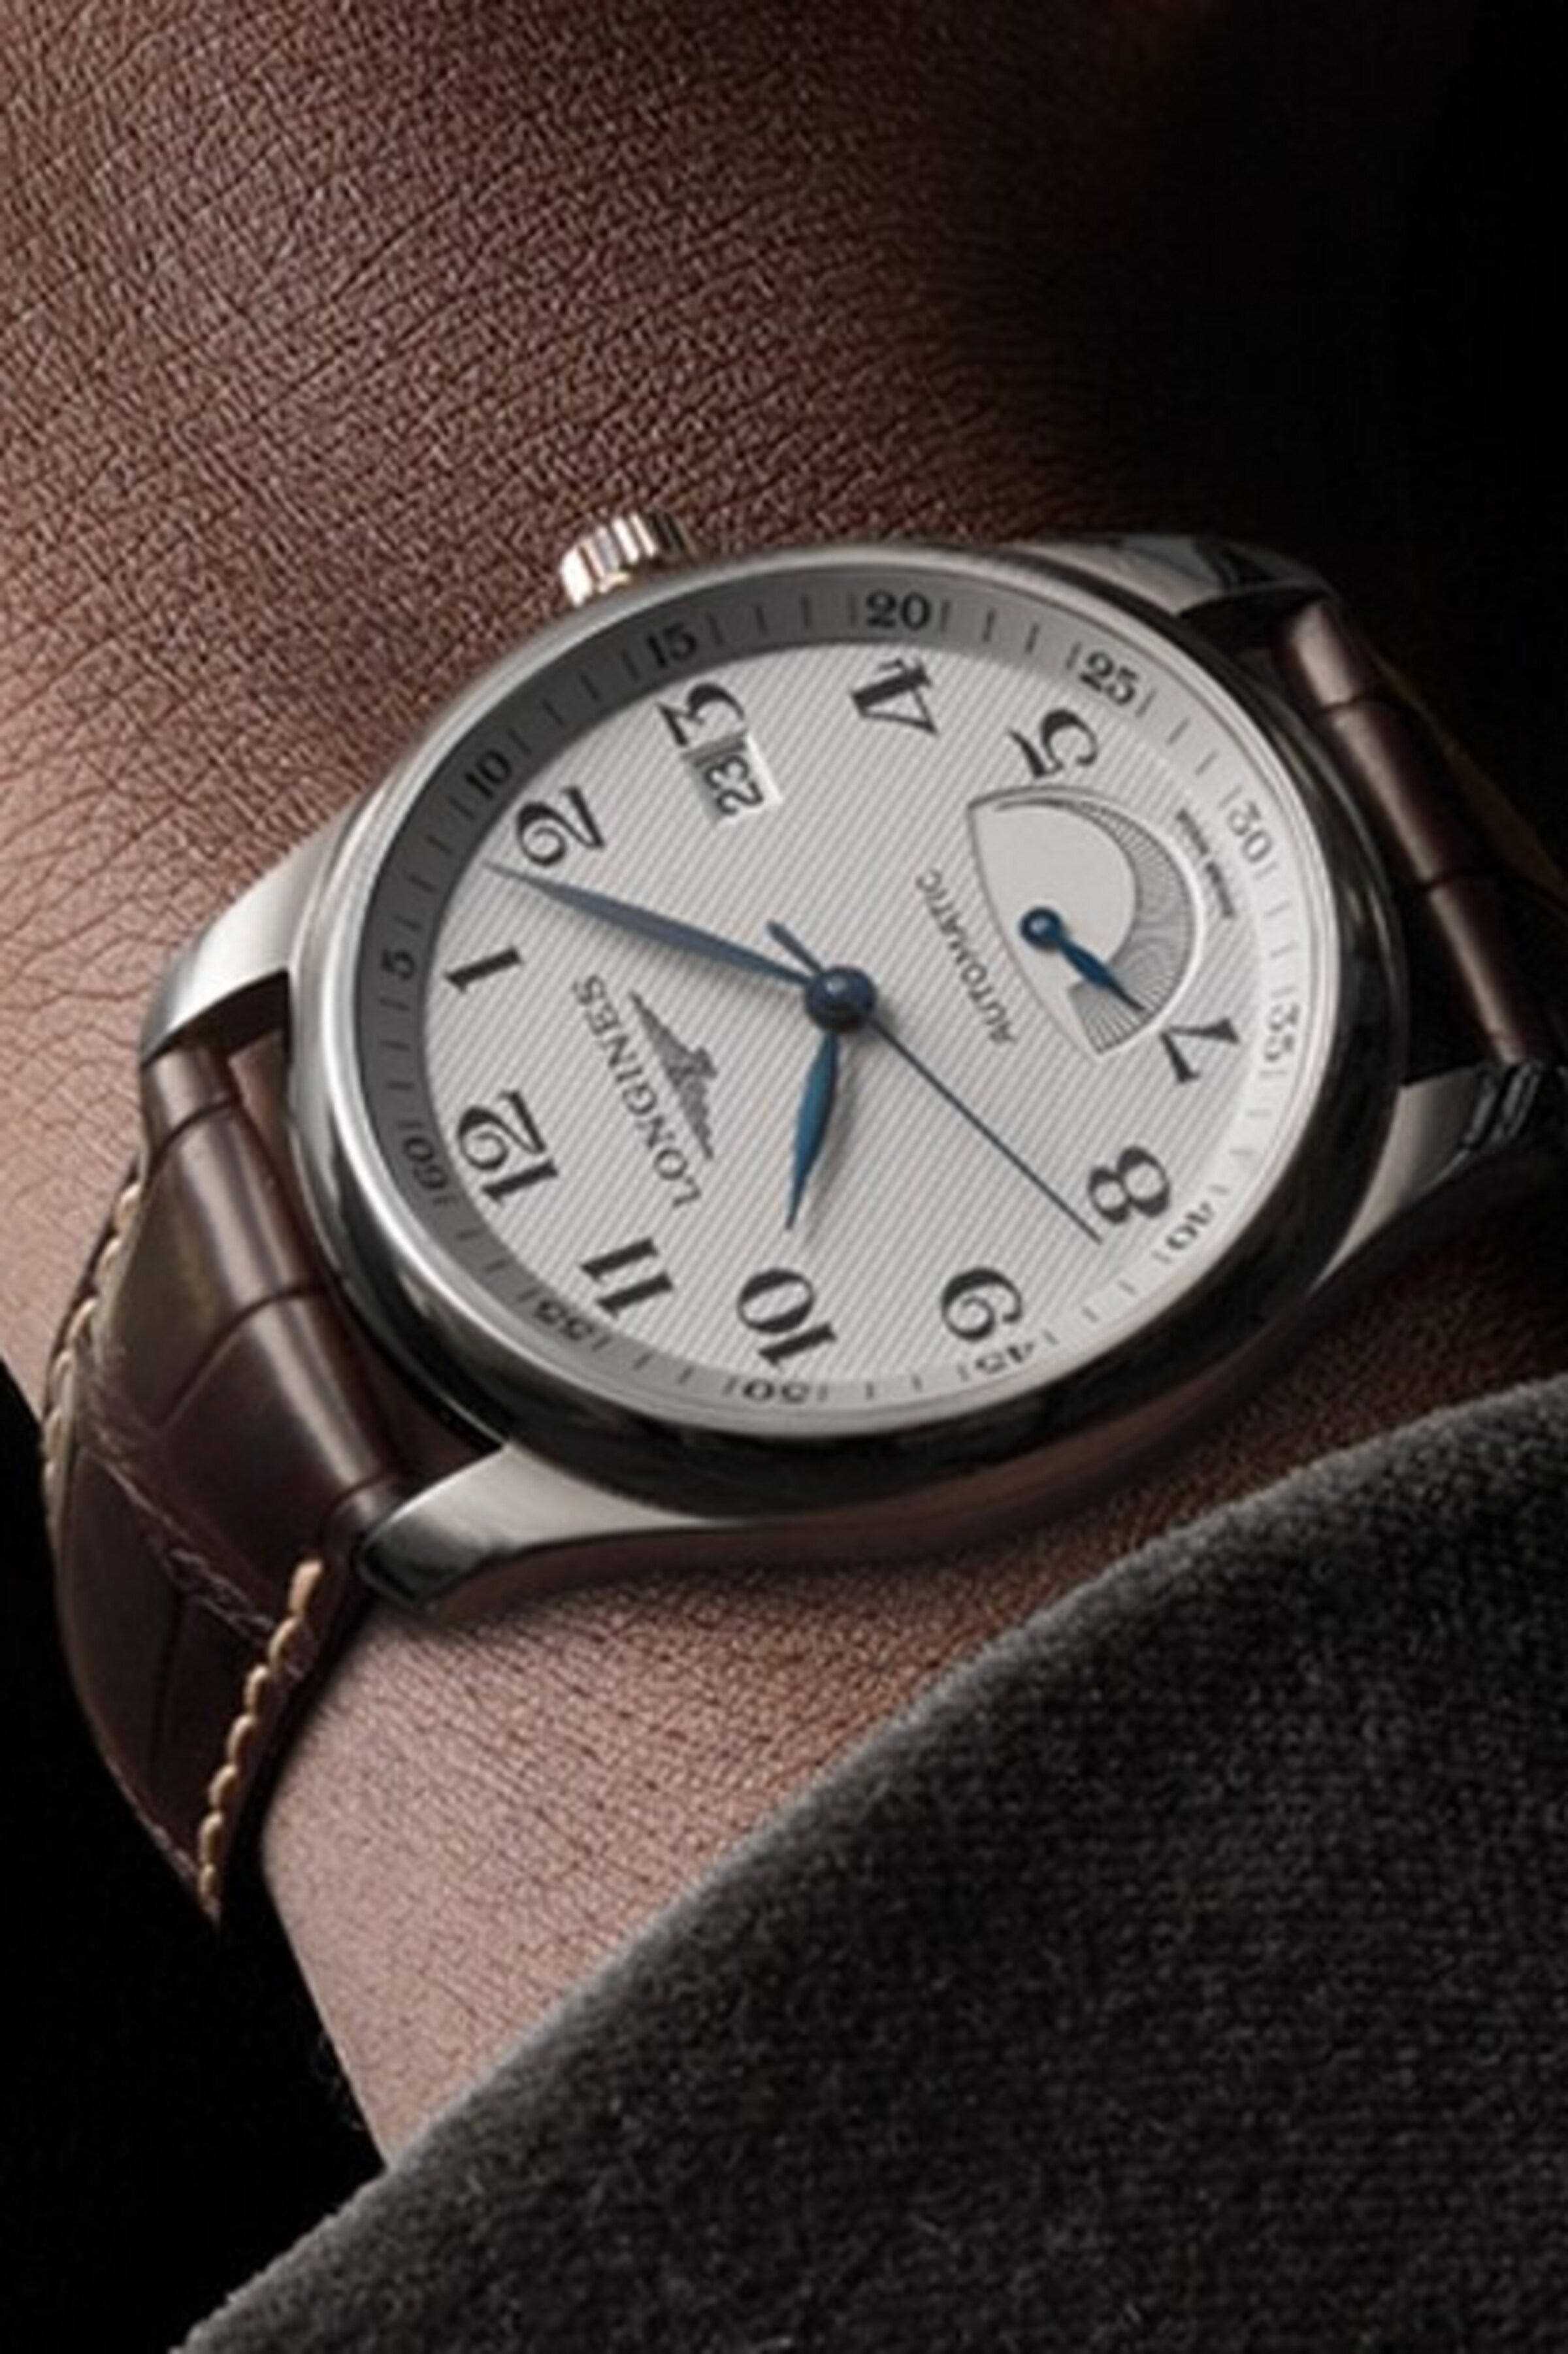 The Longines watch with Power Reserve feature